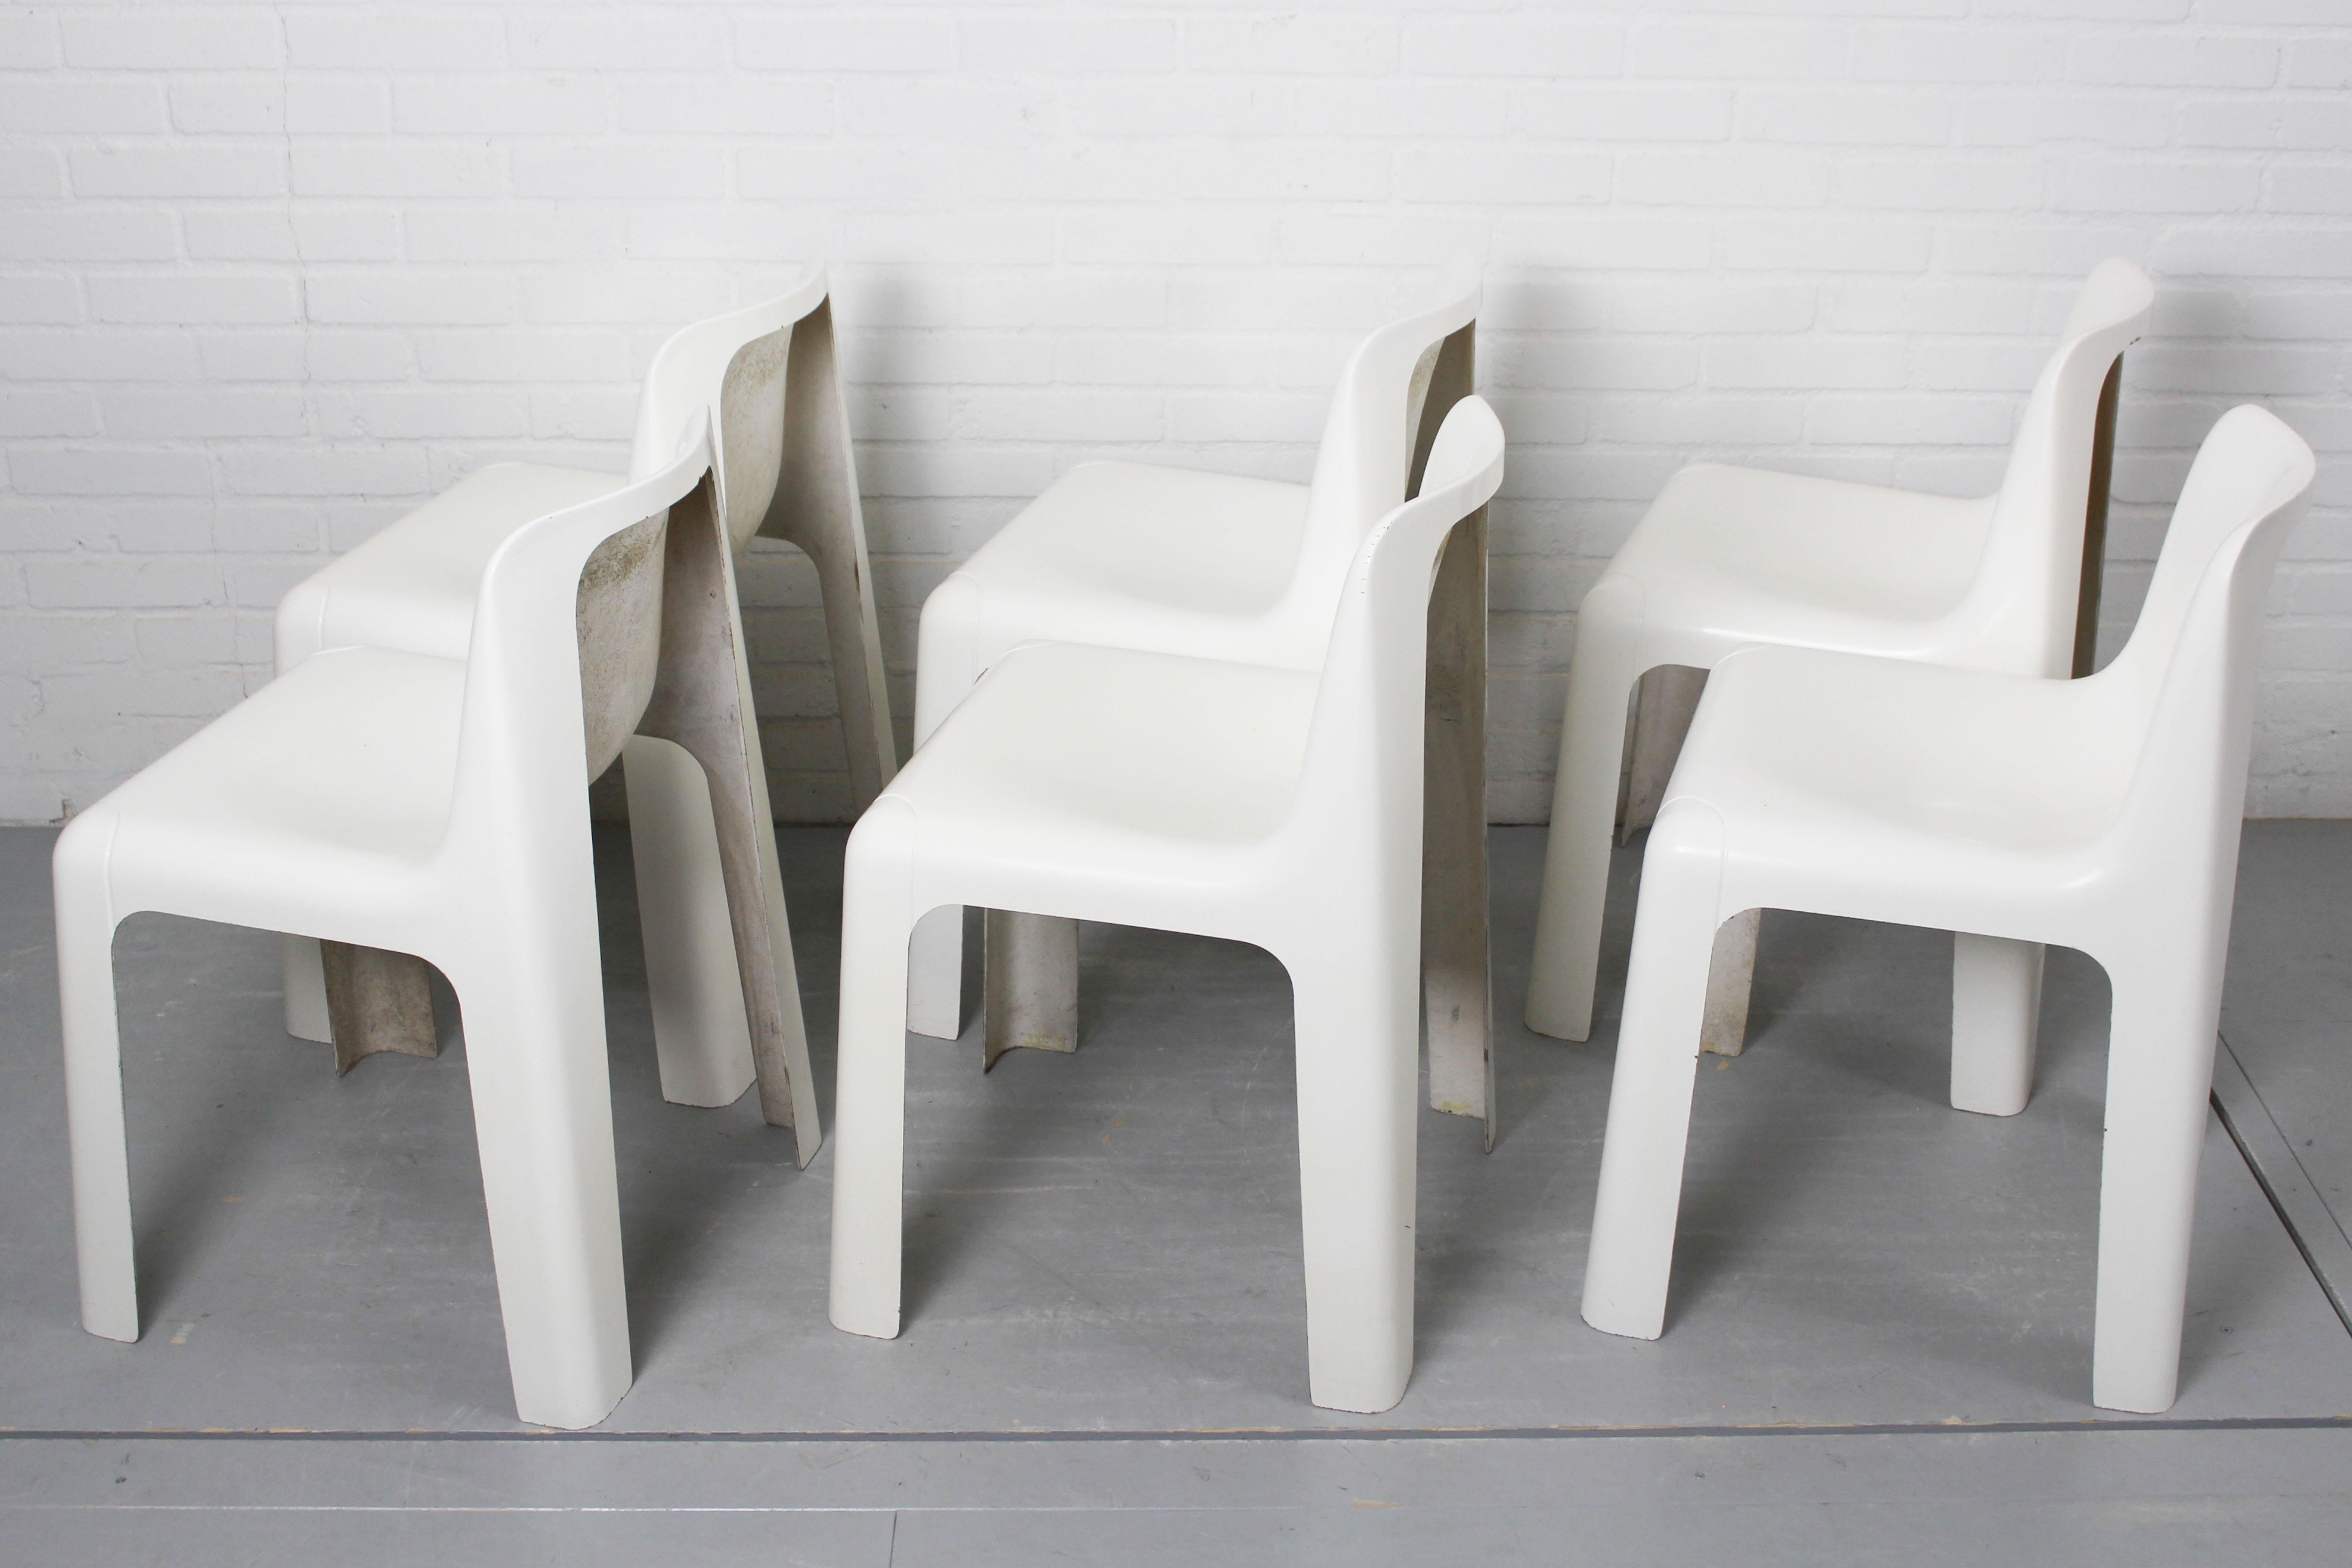 6 OZOO 700 Fiberglass Dining Chairs by Marc Berthier for Roche Bobois, 1970s For Sale 1